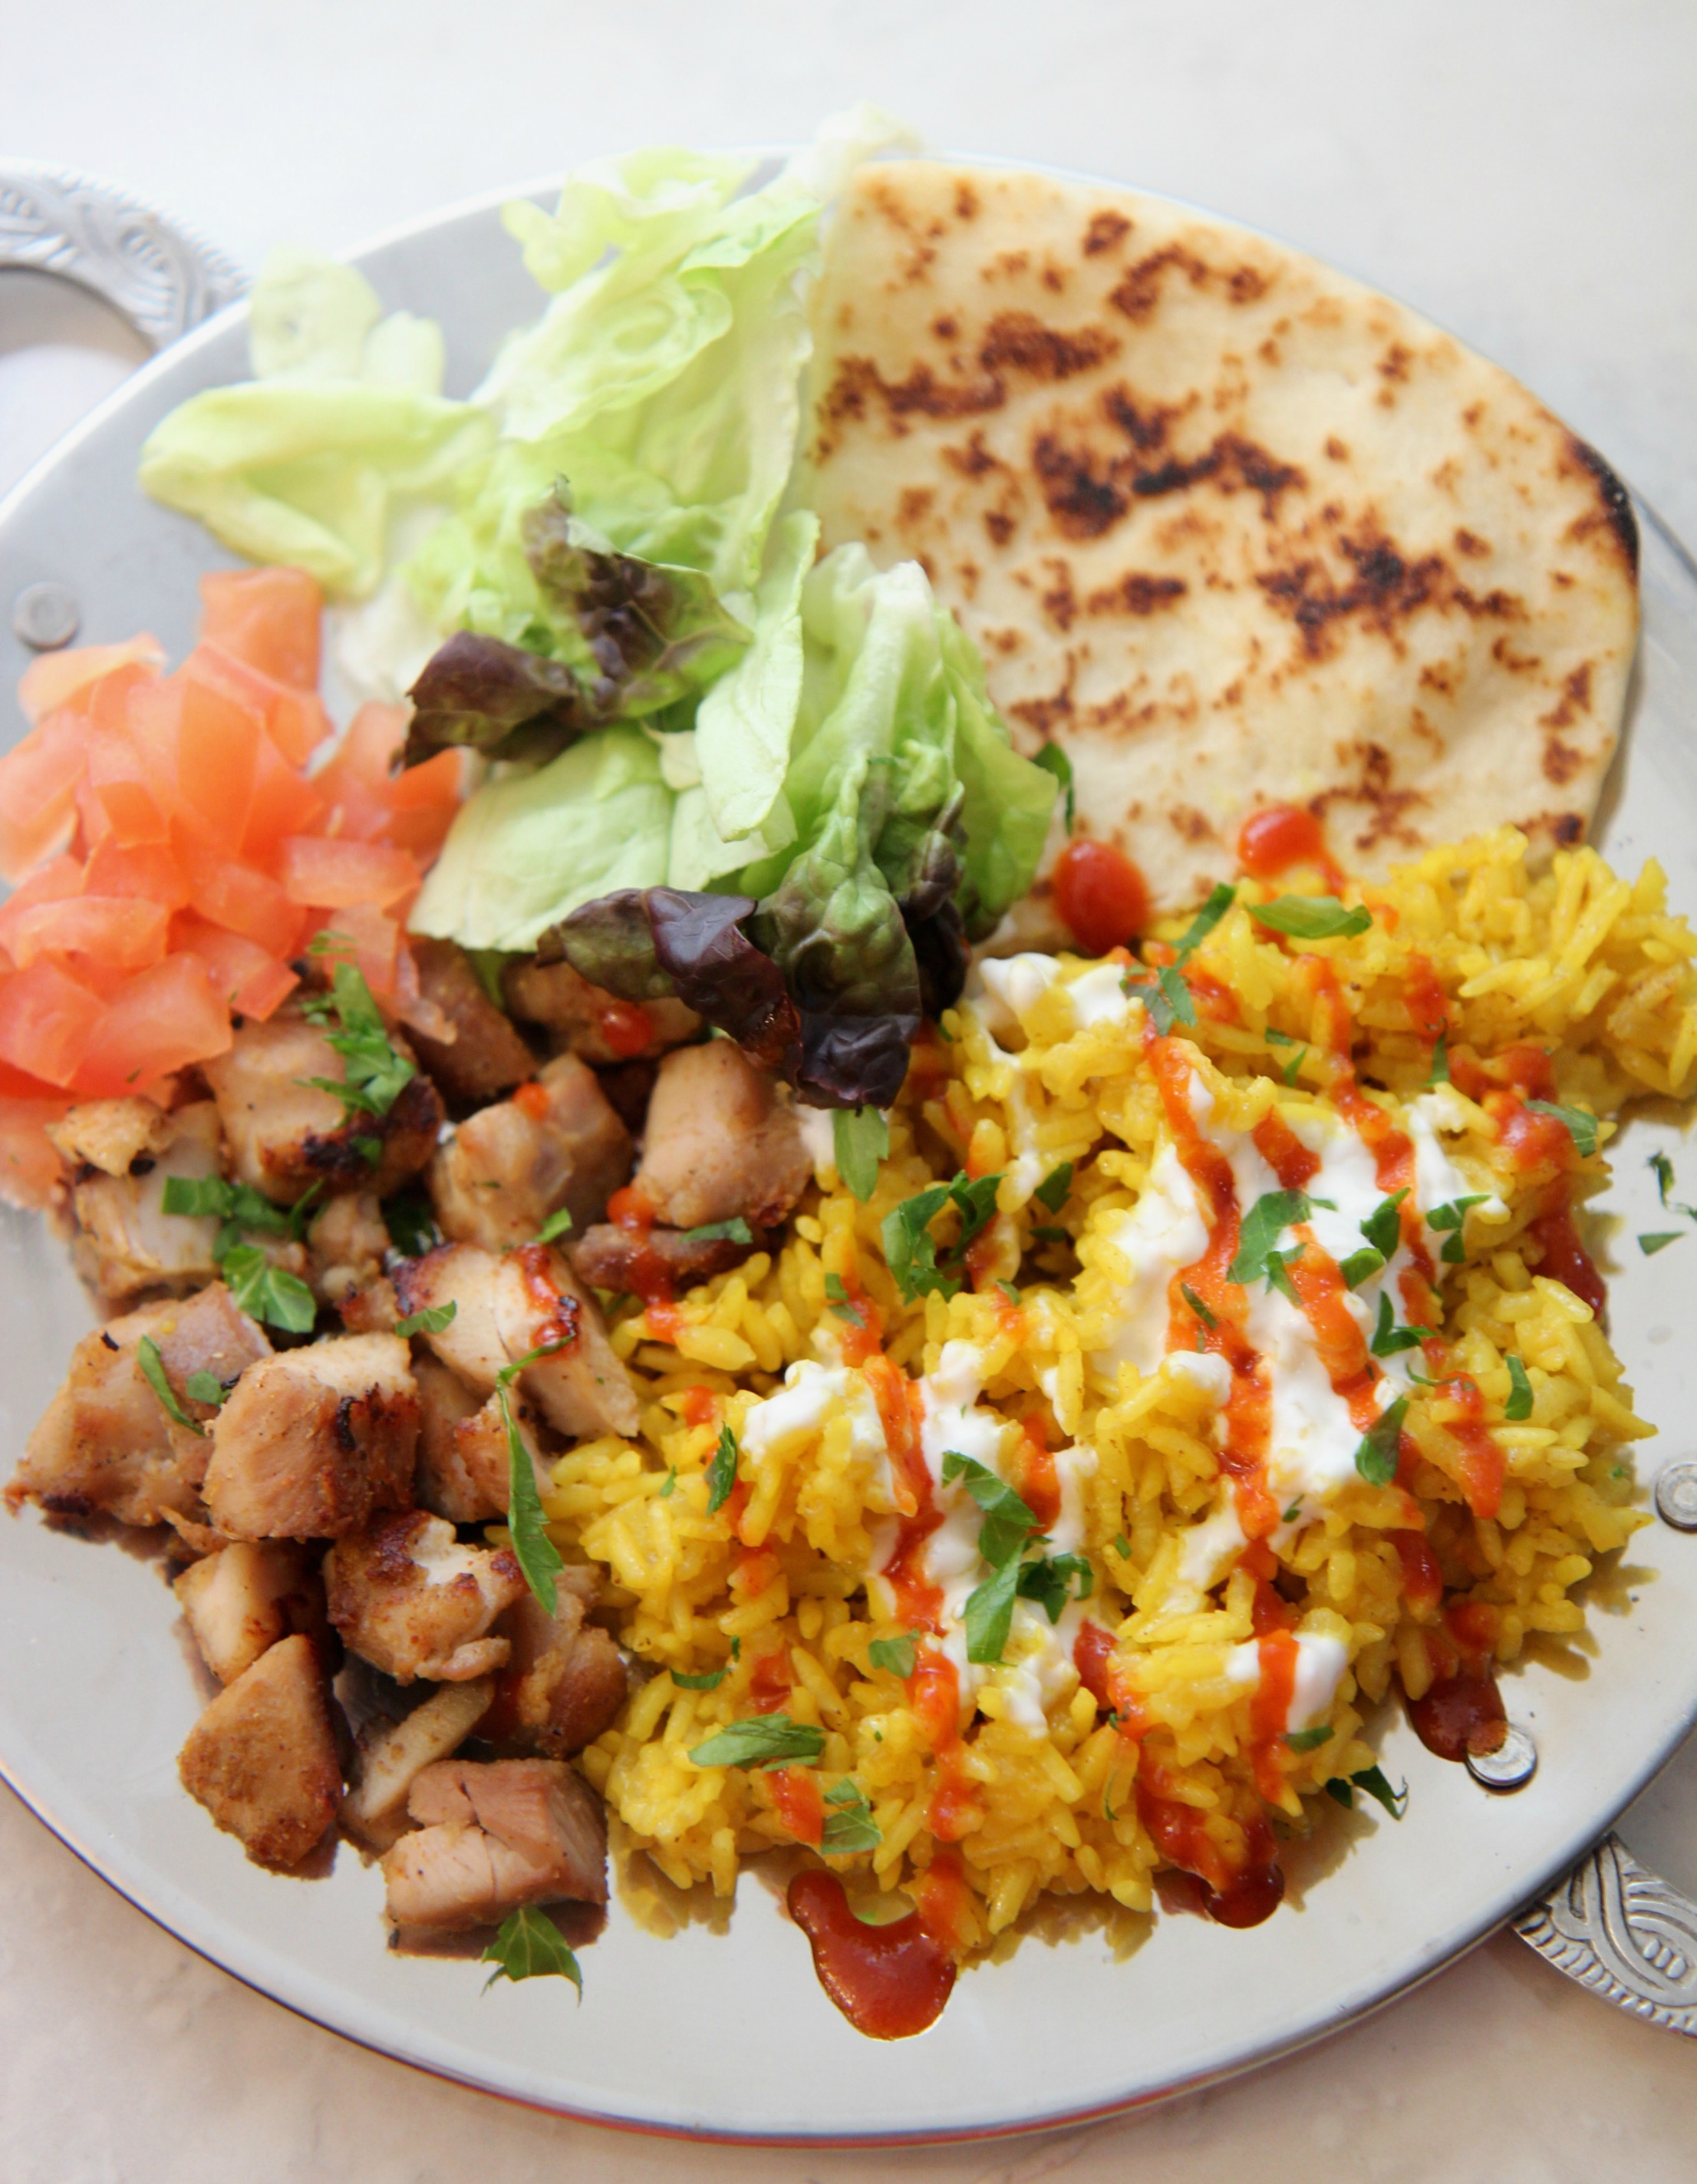 This Halal guys chicken and rice recipe is similar to what you'd get at a lunch cart in NYC.